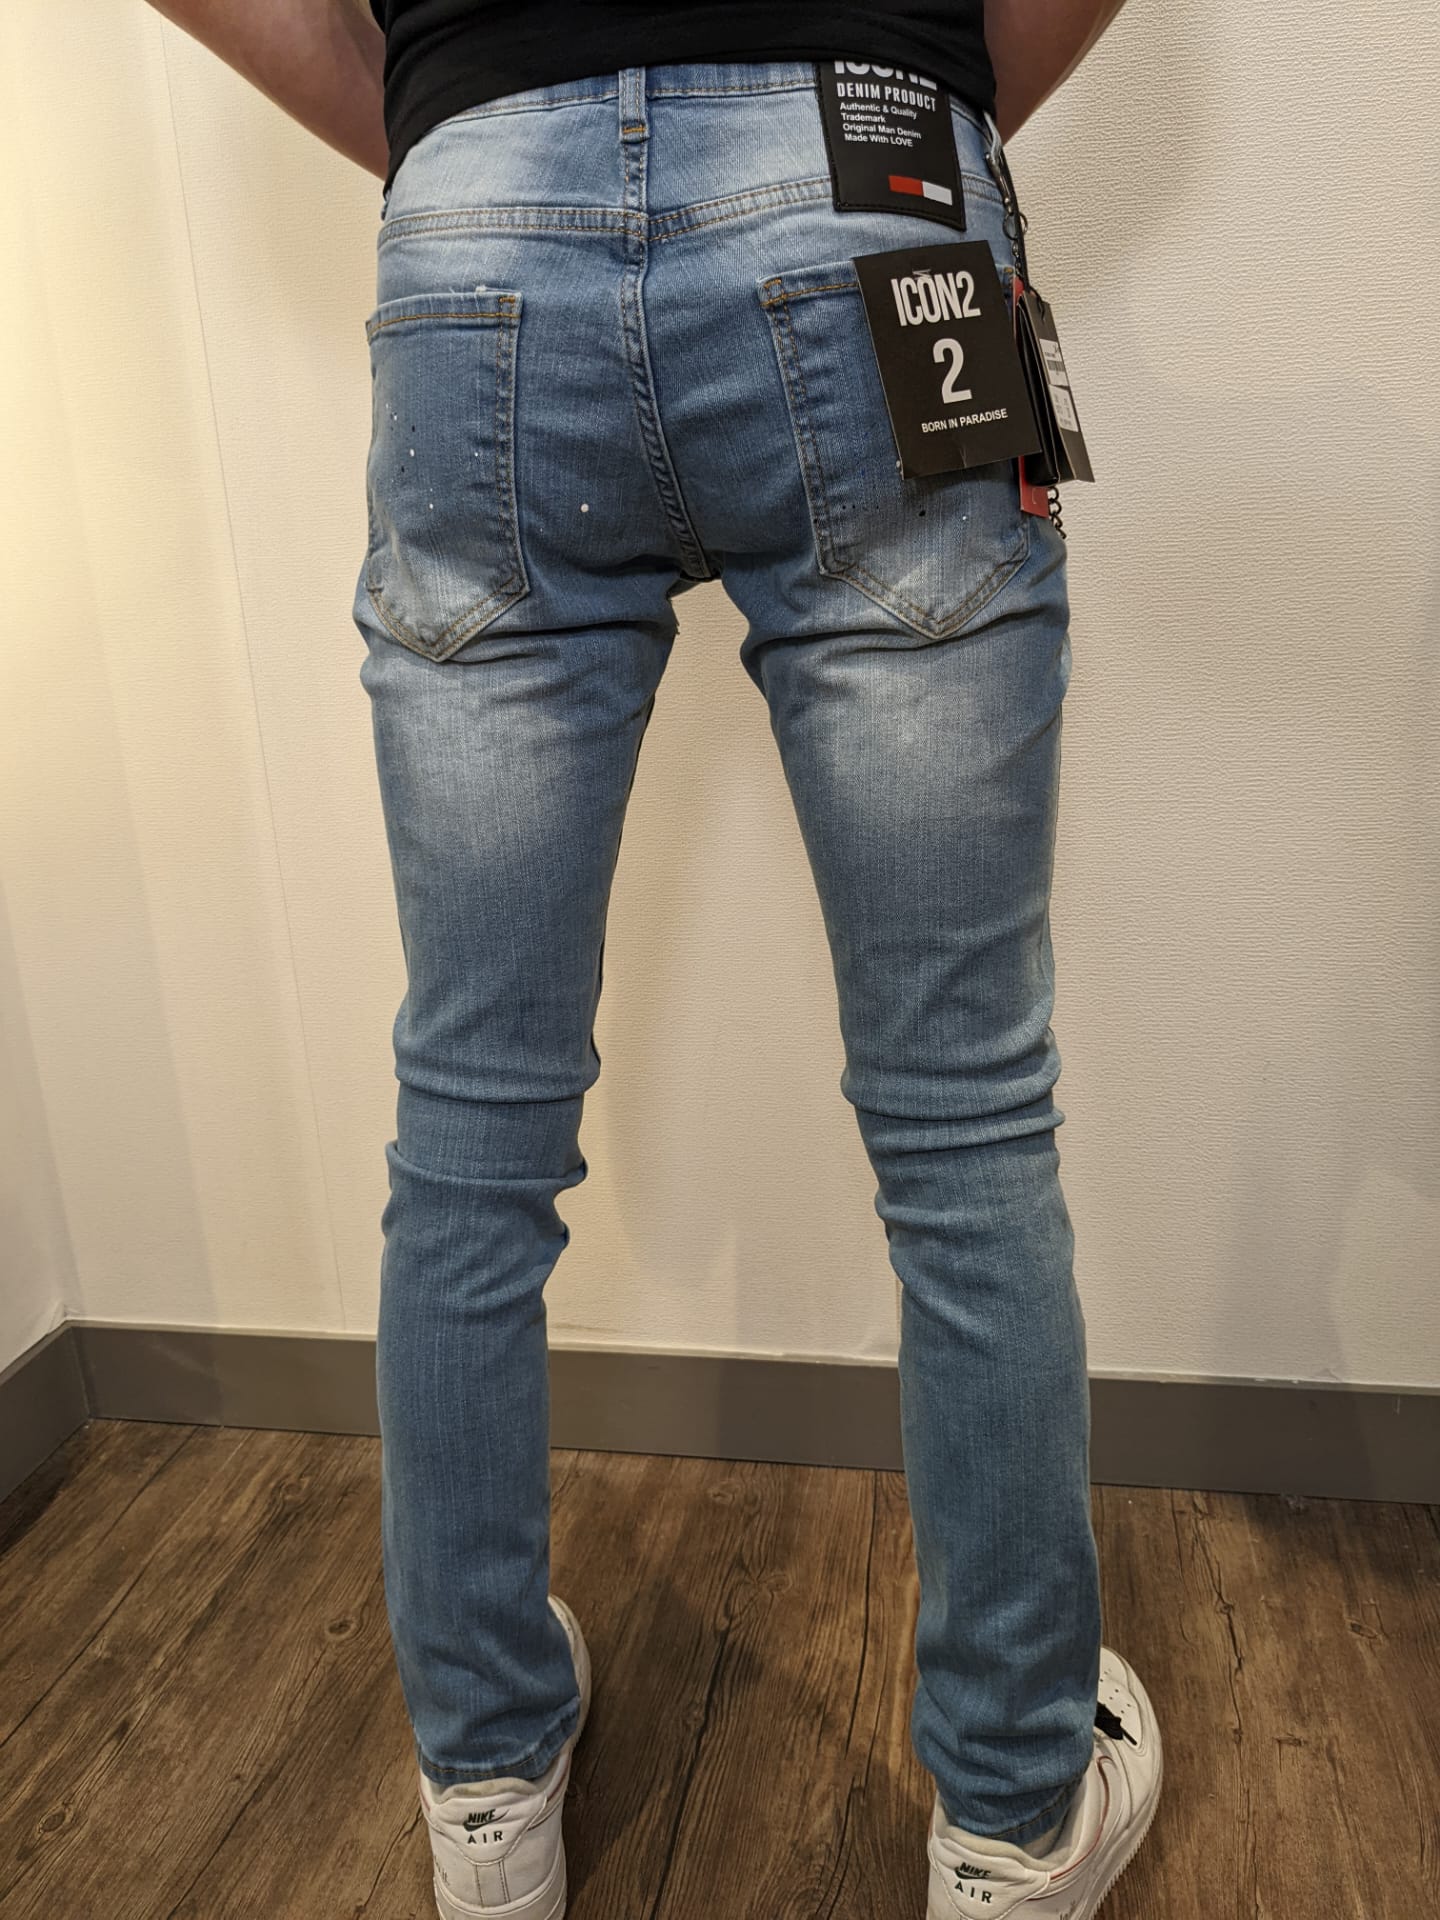 Jeans Icon 2 9373 2